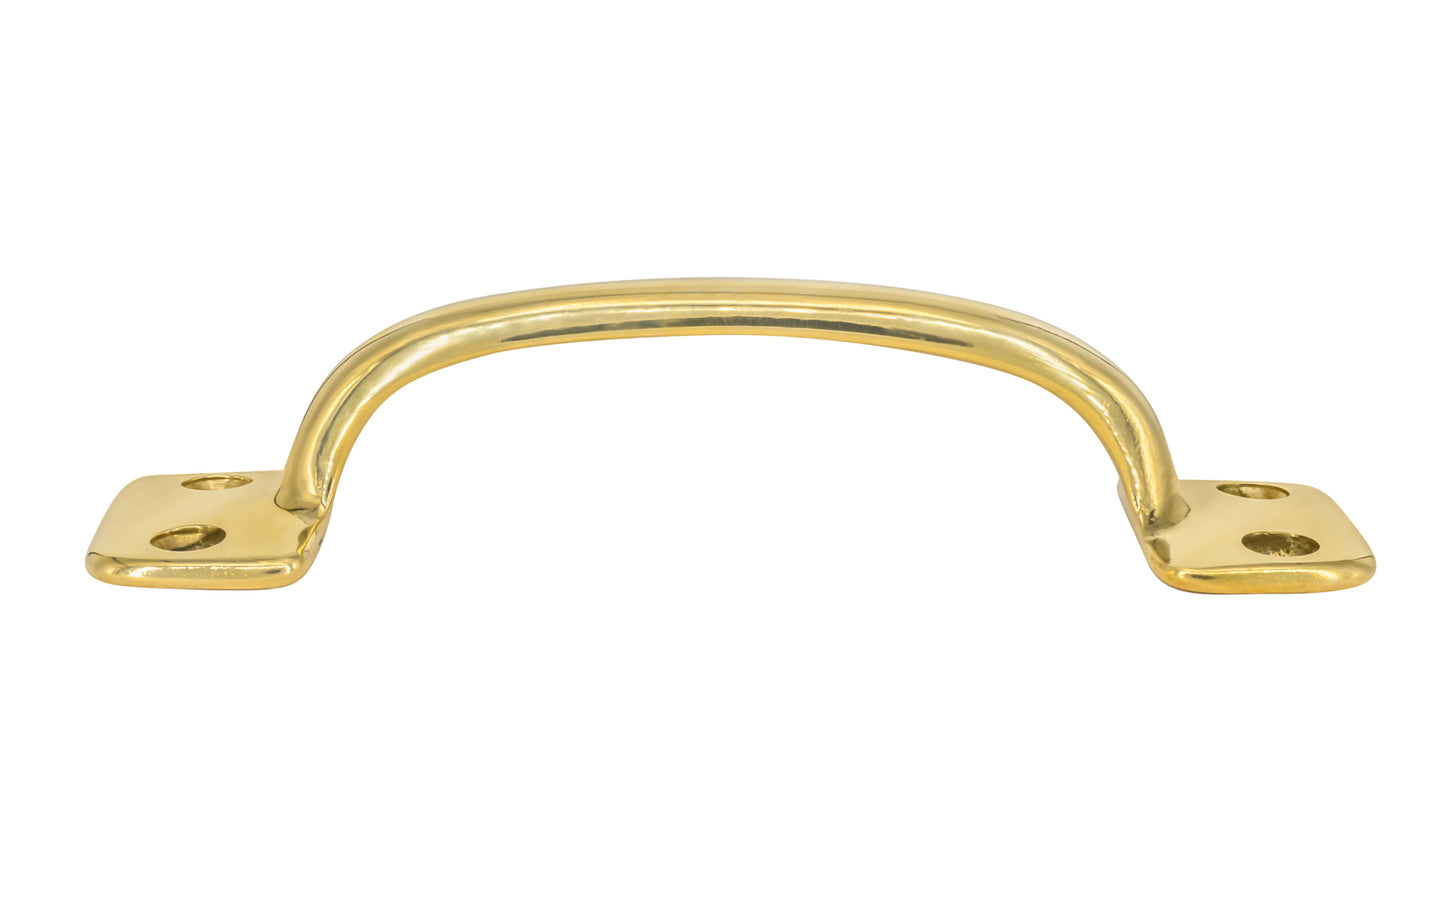 Vintage-style Hardware · Classic Solid Brass Handle Pull ~ 4" On Centers. Versatile handle is great for sash windows, cabinets, drawers, file cabinets. Arts & Crafts handle pull. Lacquered Brass Finish.